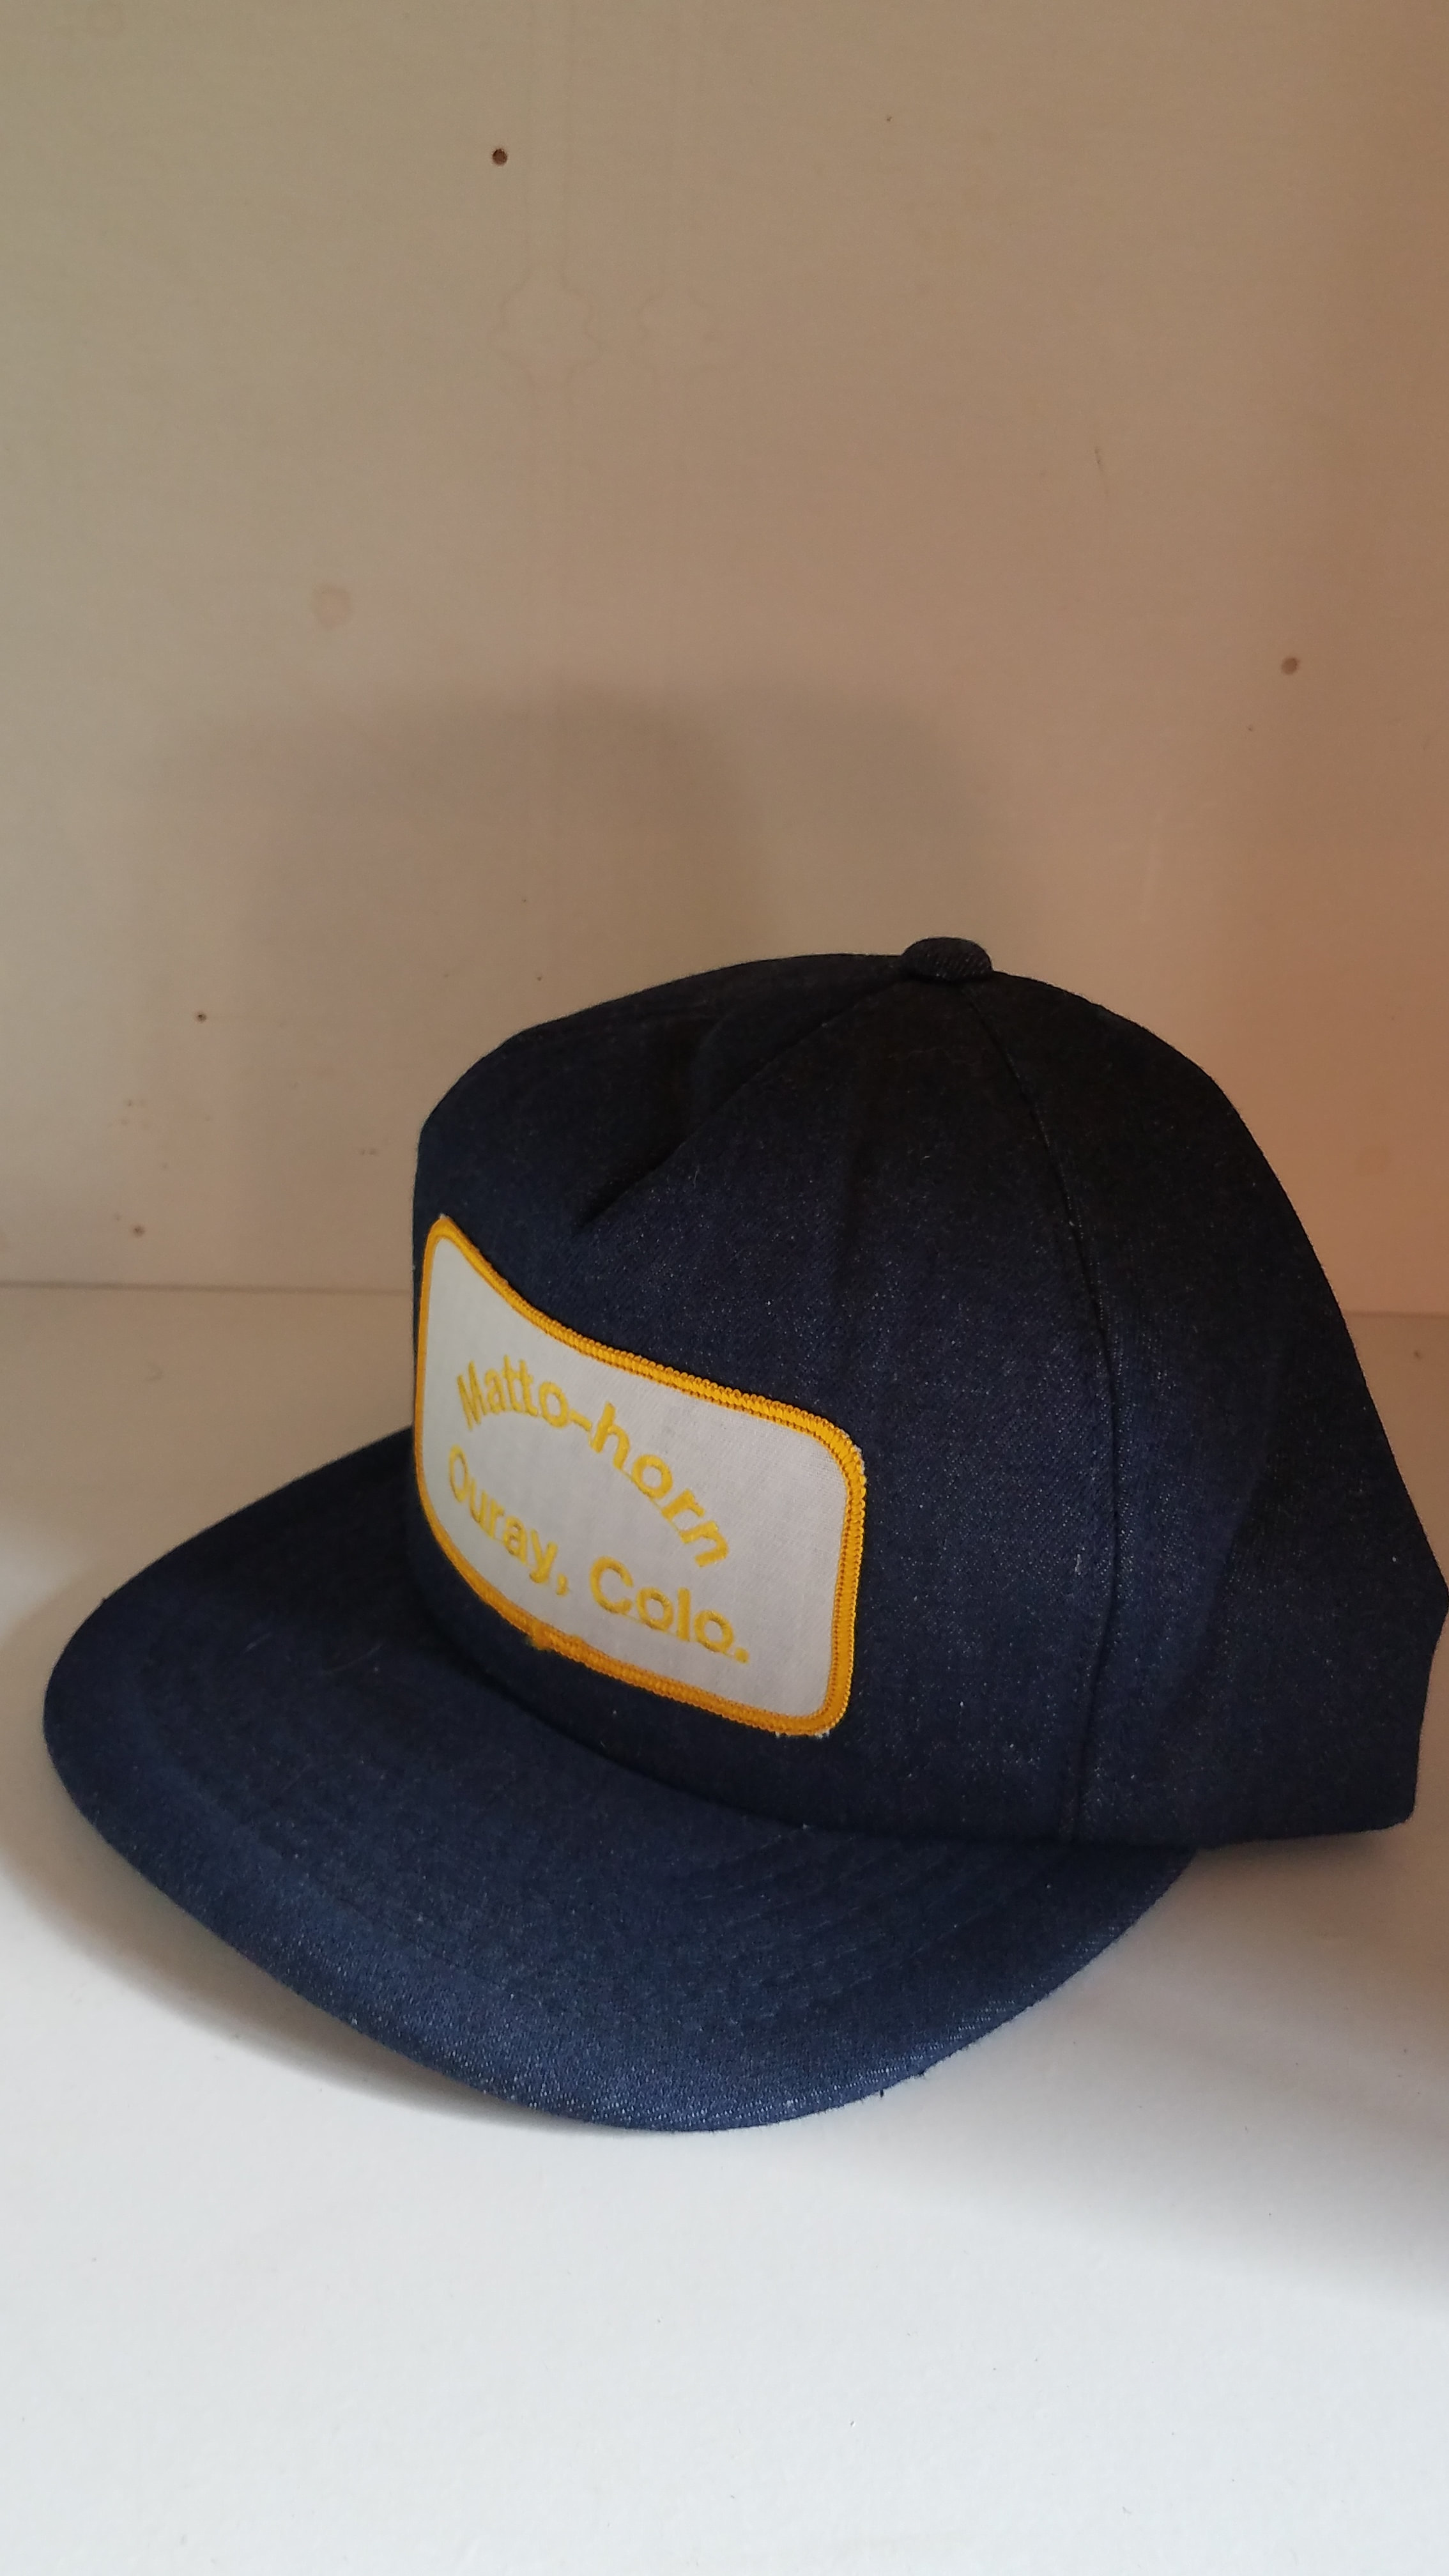 Vintage Snapback Matto-Horn, Ouray, Colo. Hat